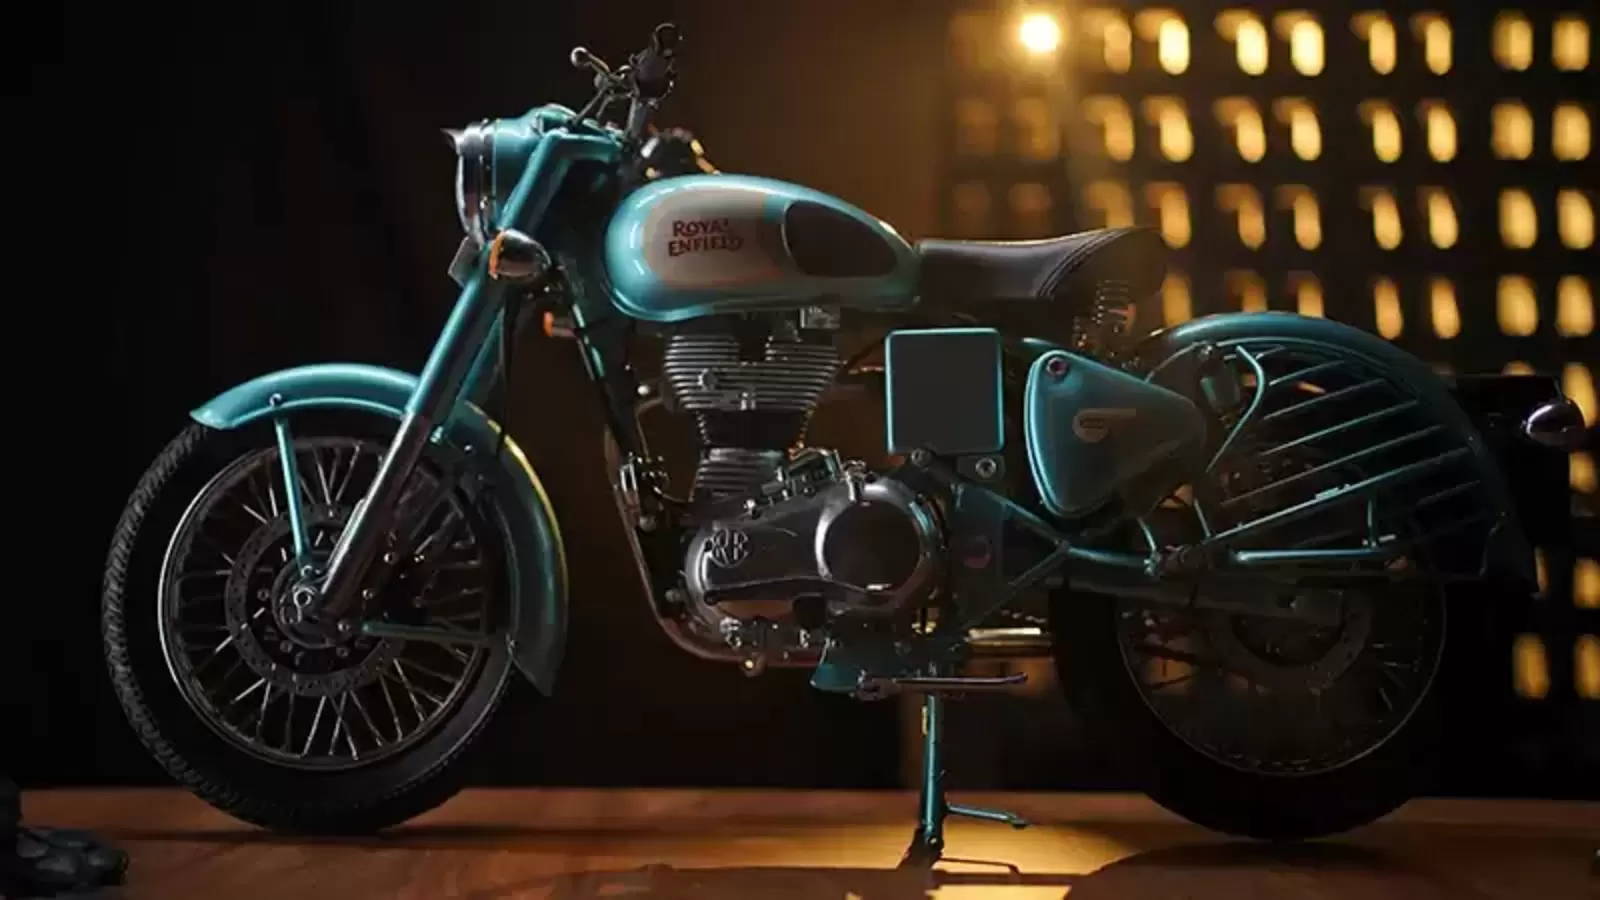 Royal Enfield Classic 500 scale model costs as much as a 100cc scooter   TeamBHP